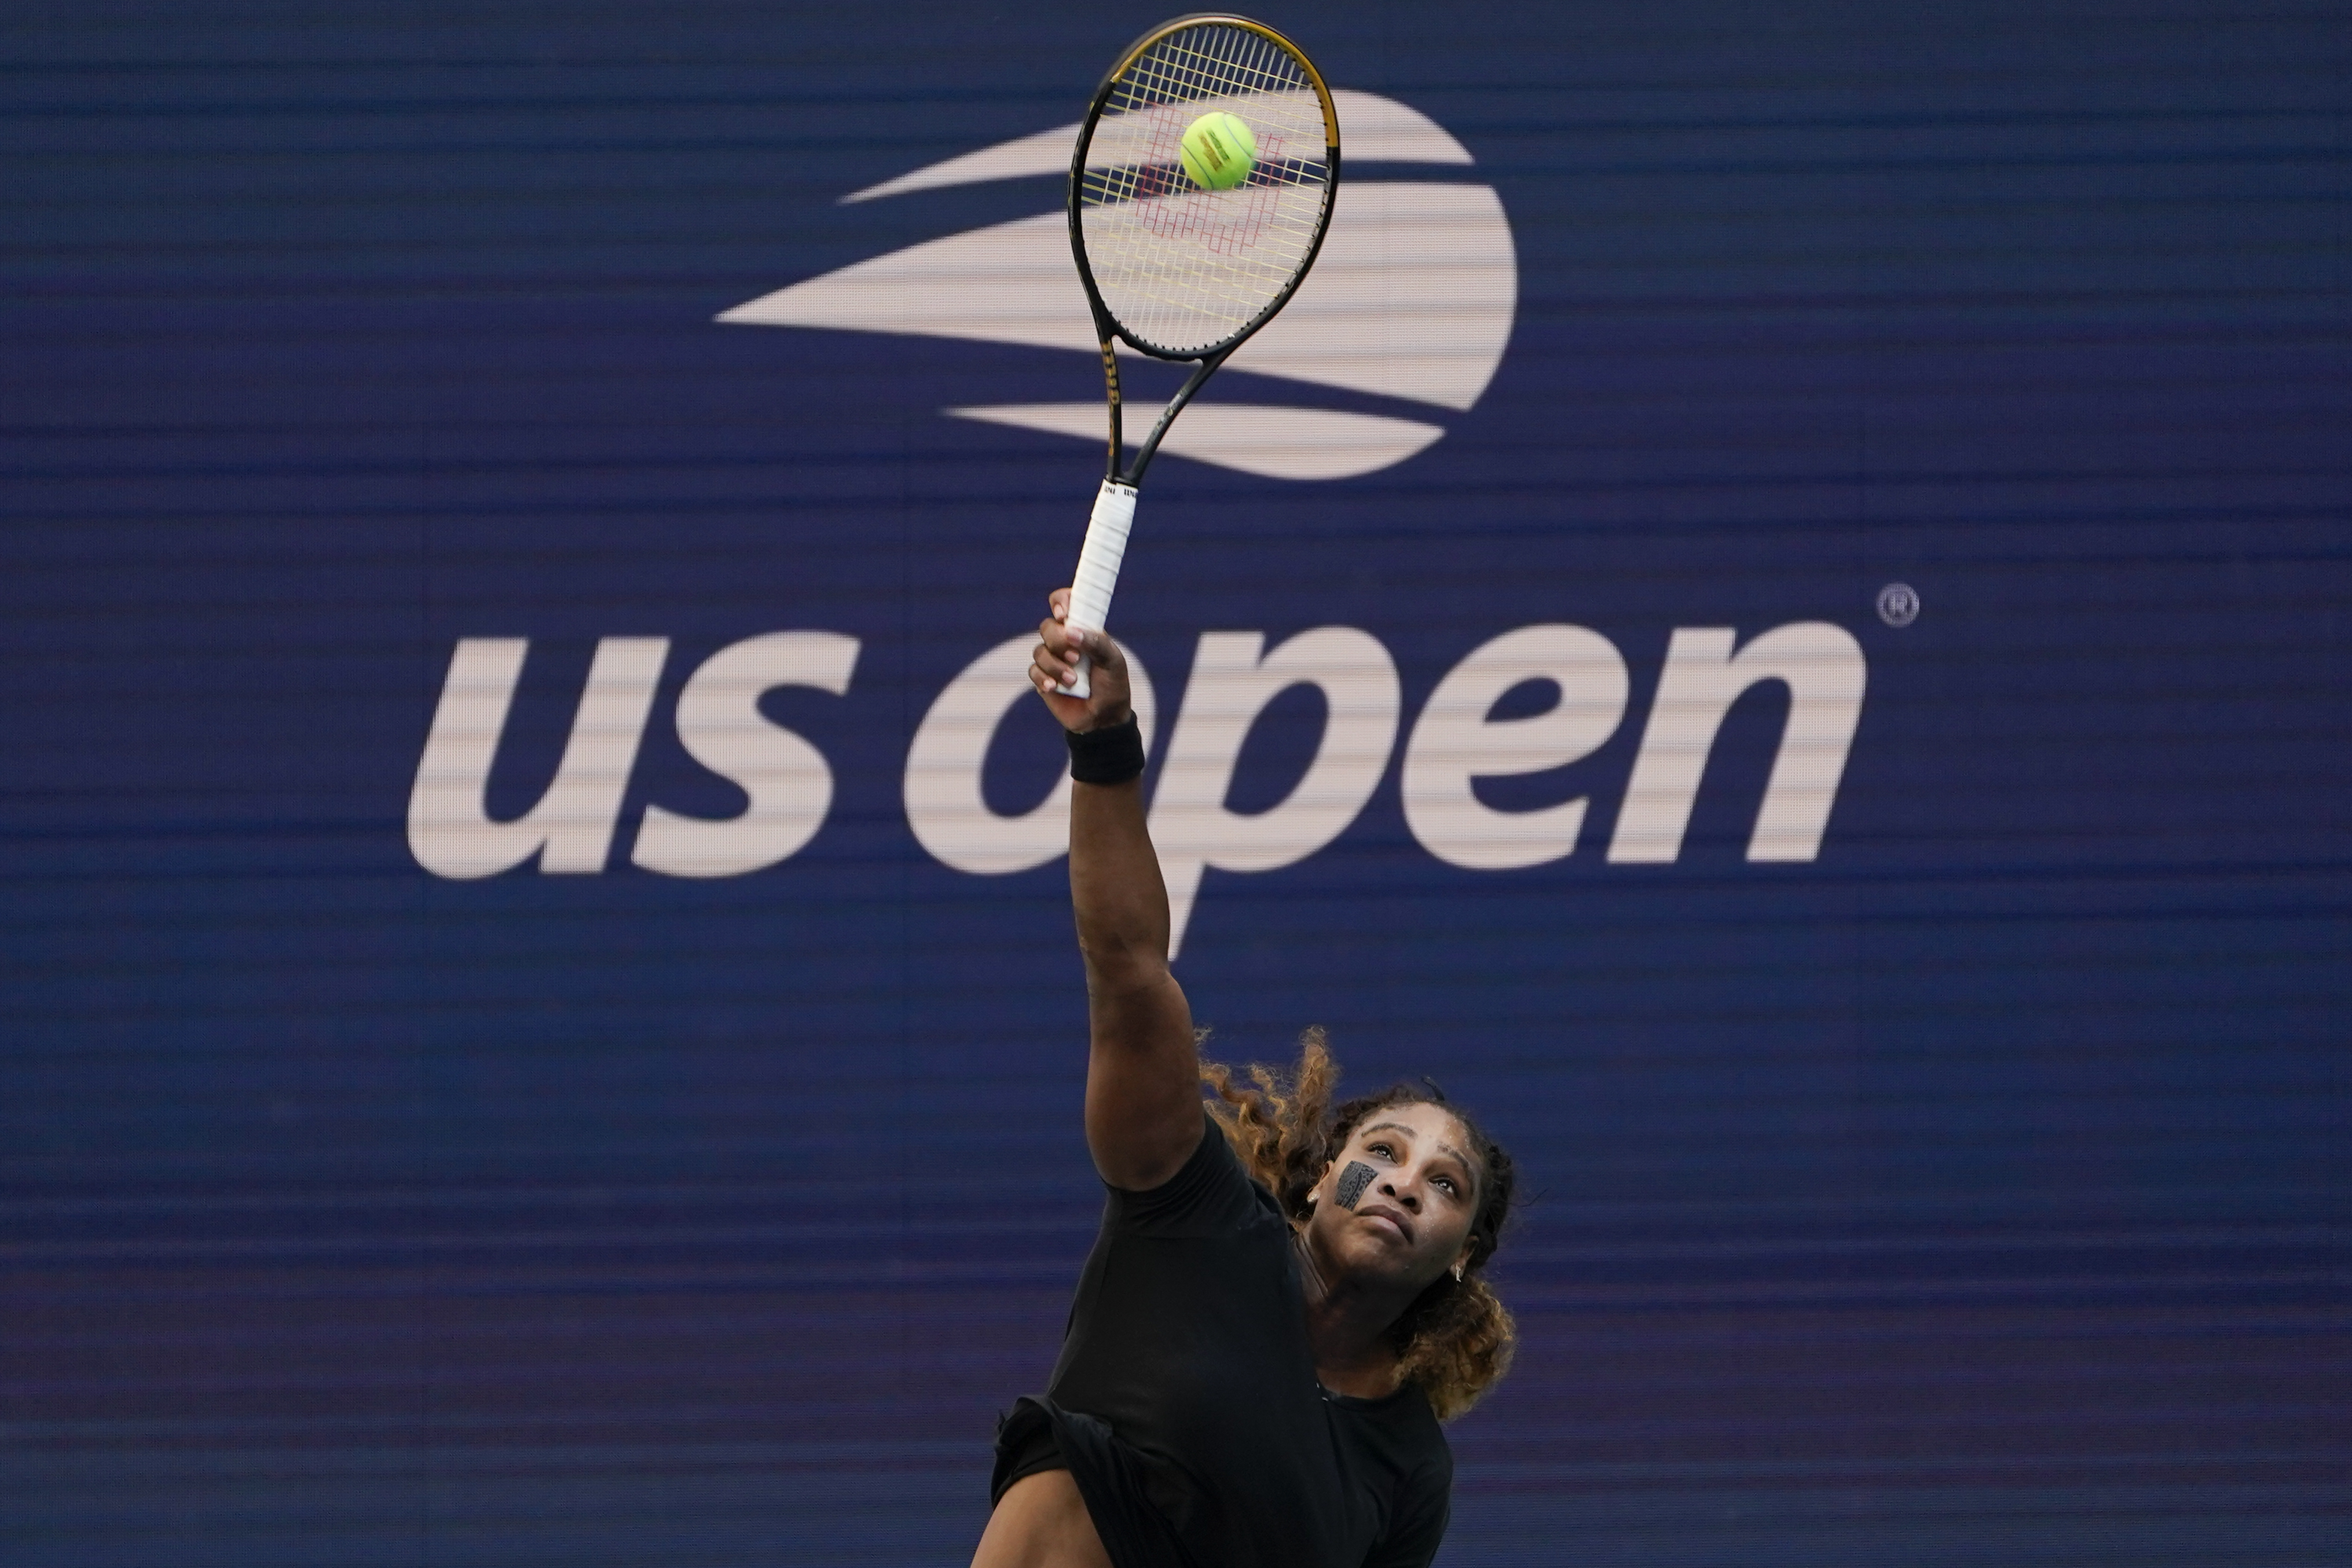 US Open 2022 free live stream How to watch every tennis match, TV Serena Williams